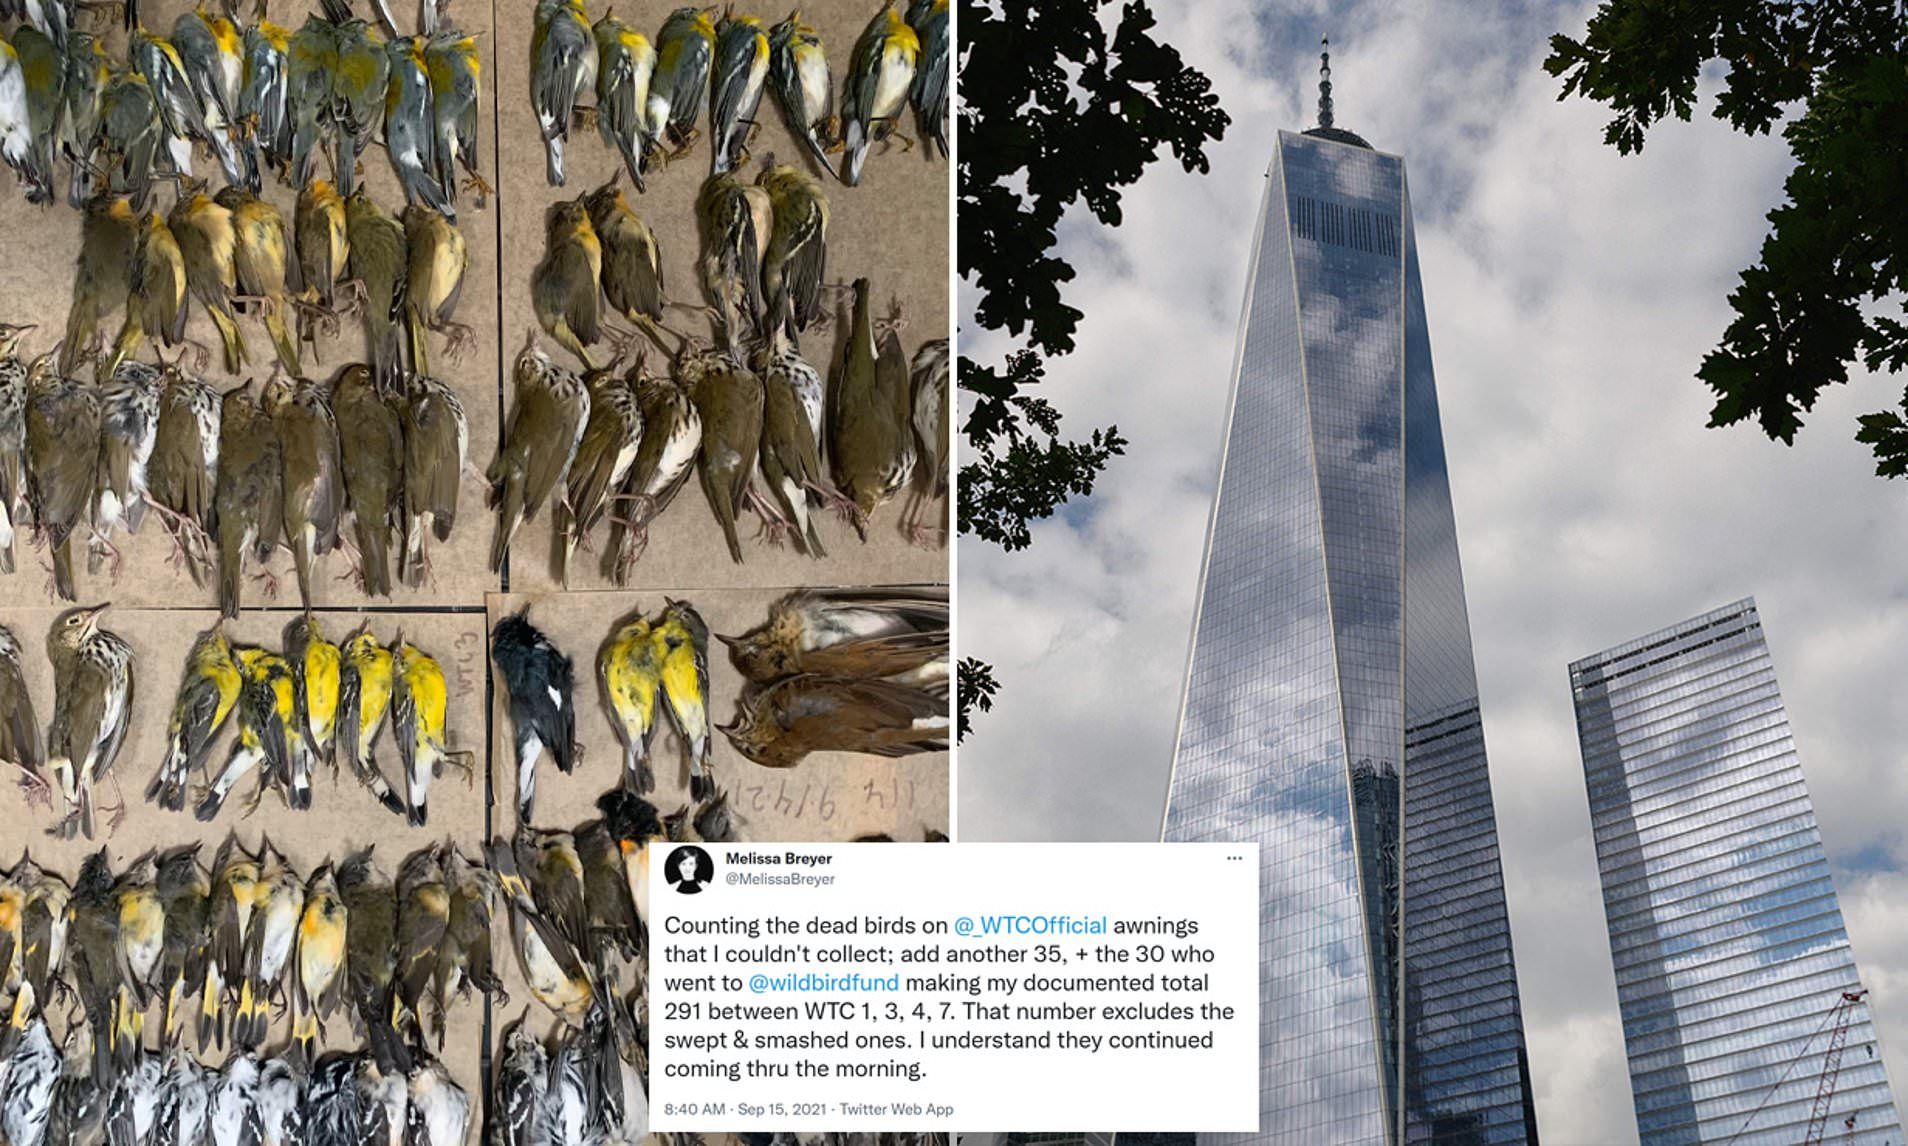 Nearly 300 migrating songbirds crash into skyscrapers in NYC